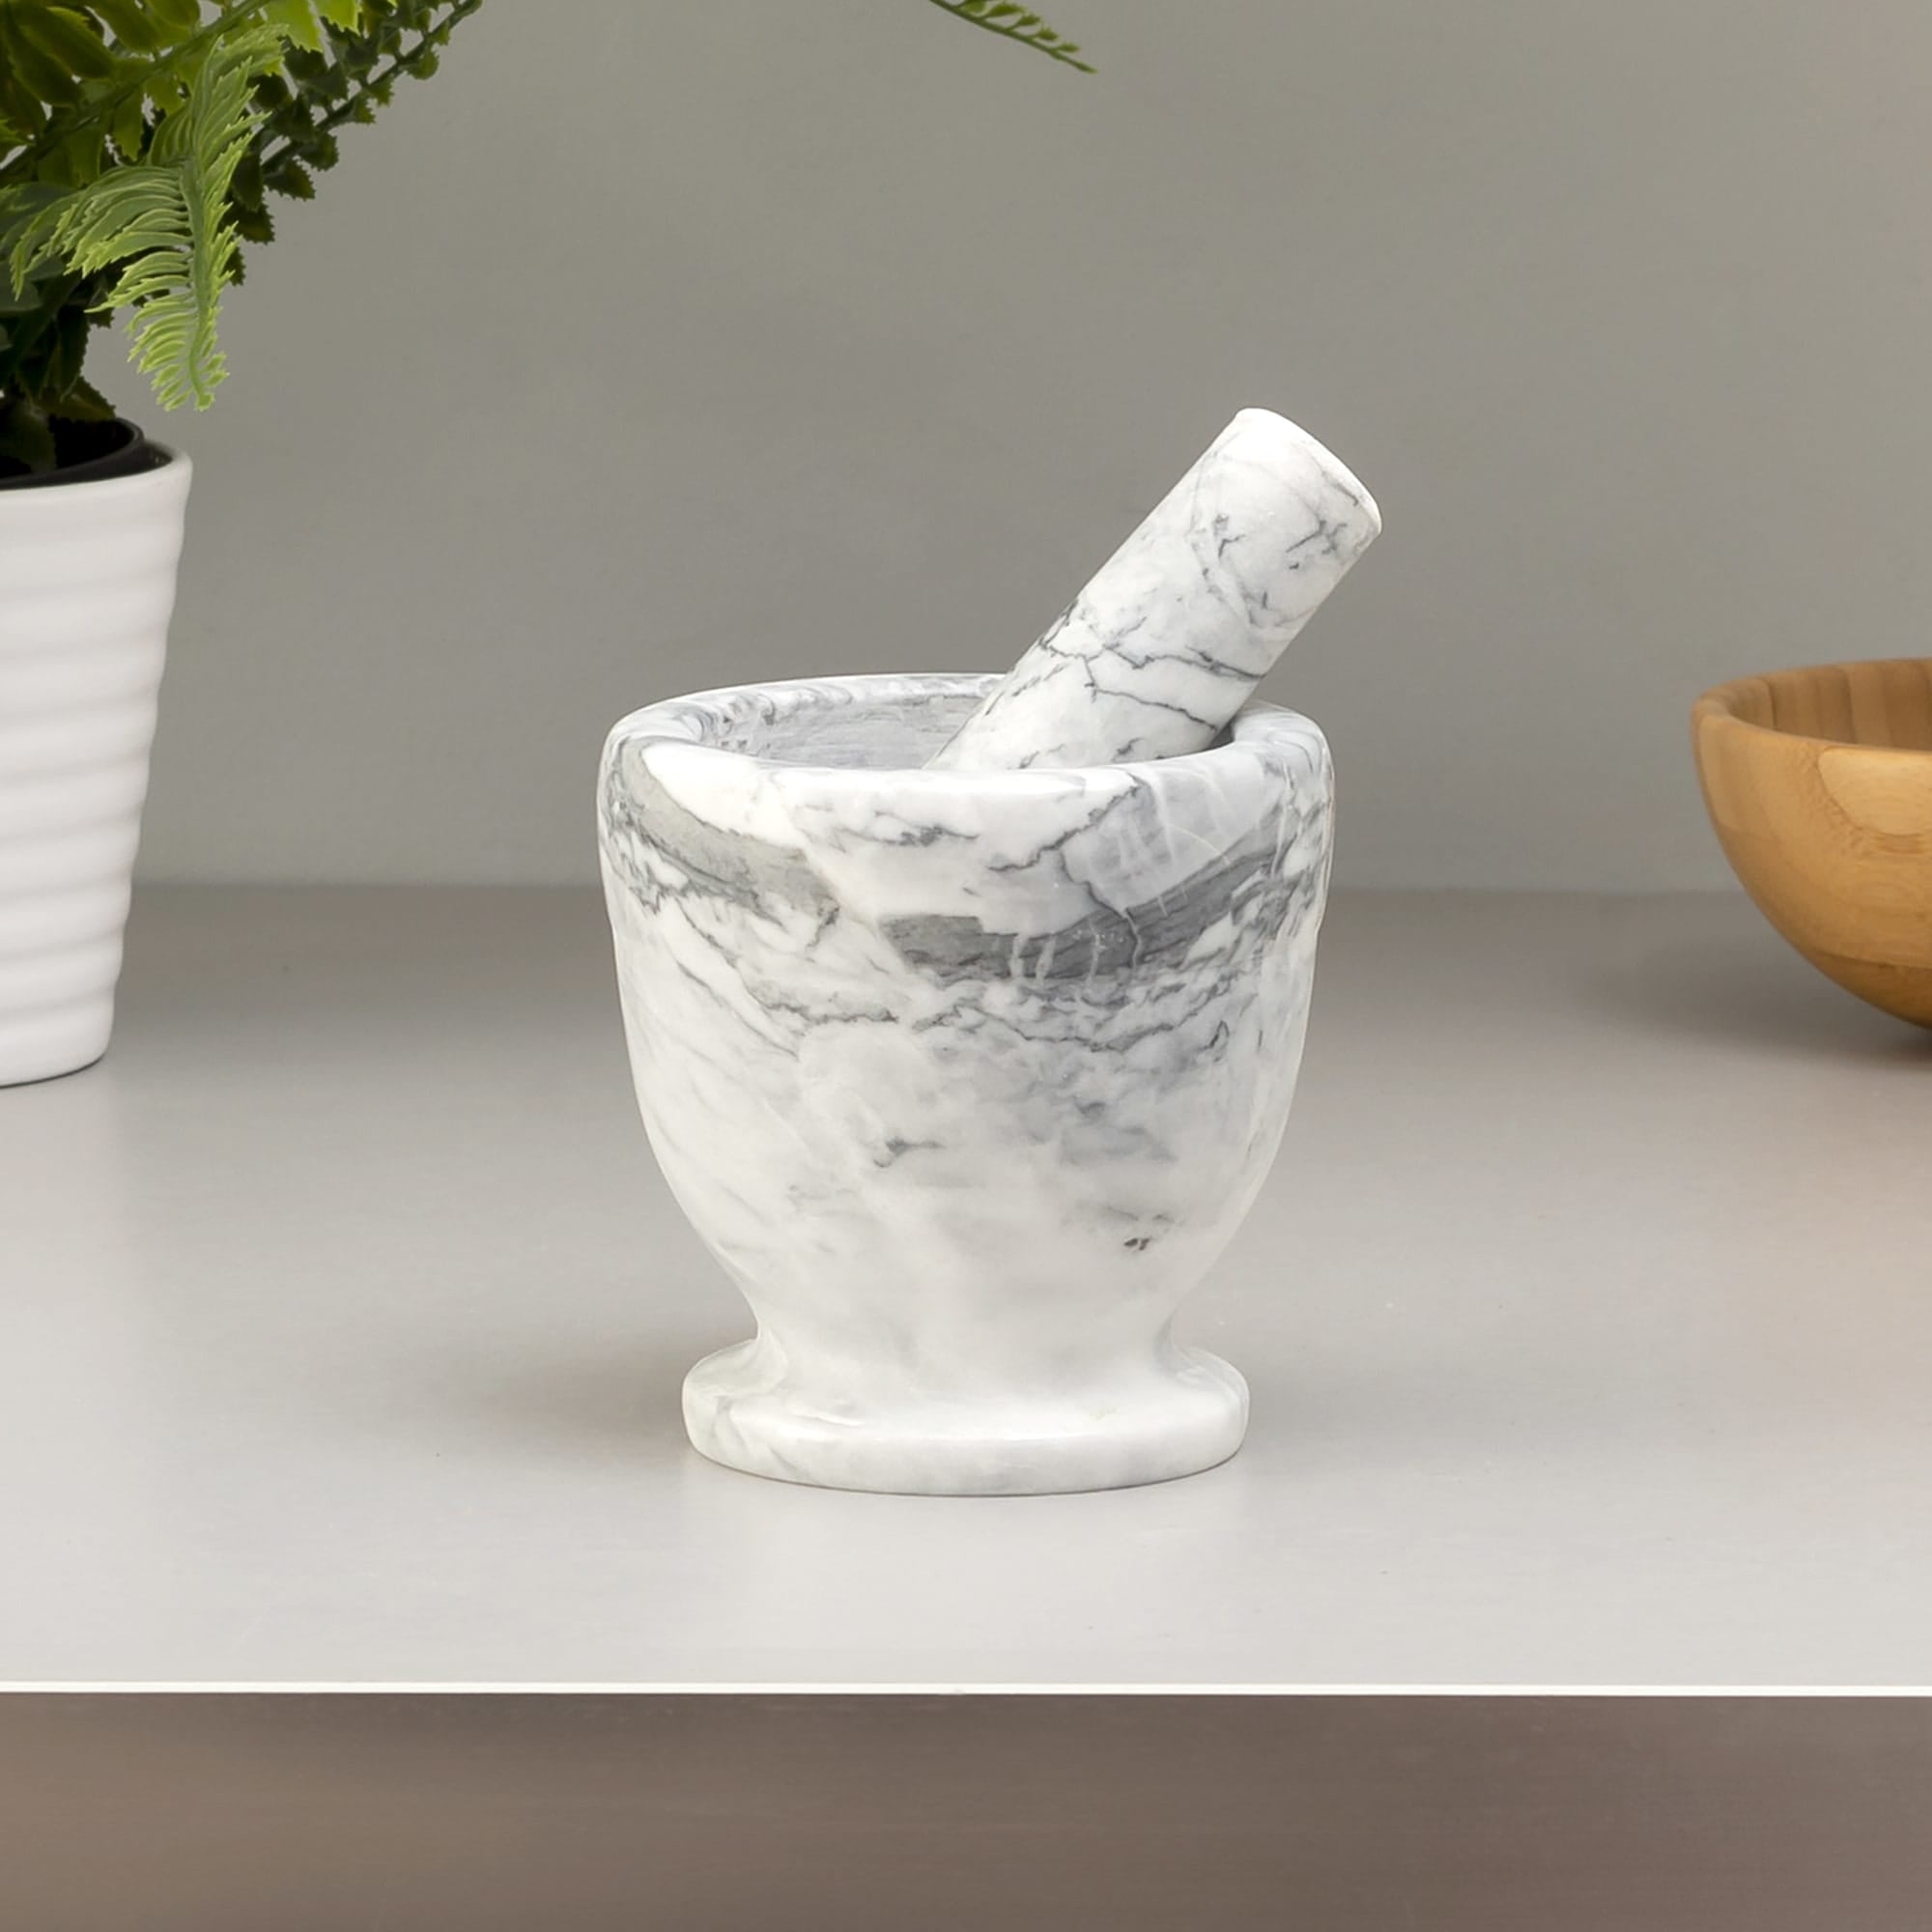 Marble Mortar And Pestle Set - Large Heavy White Marble - Quality